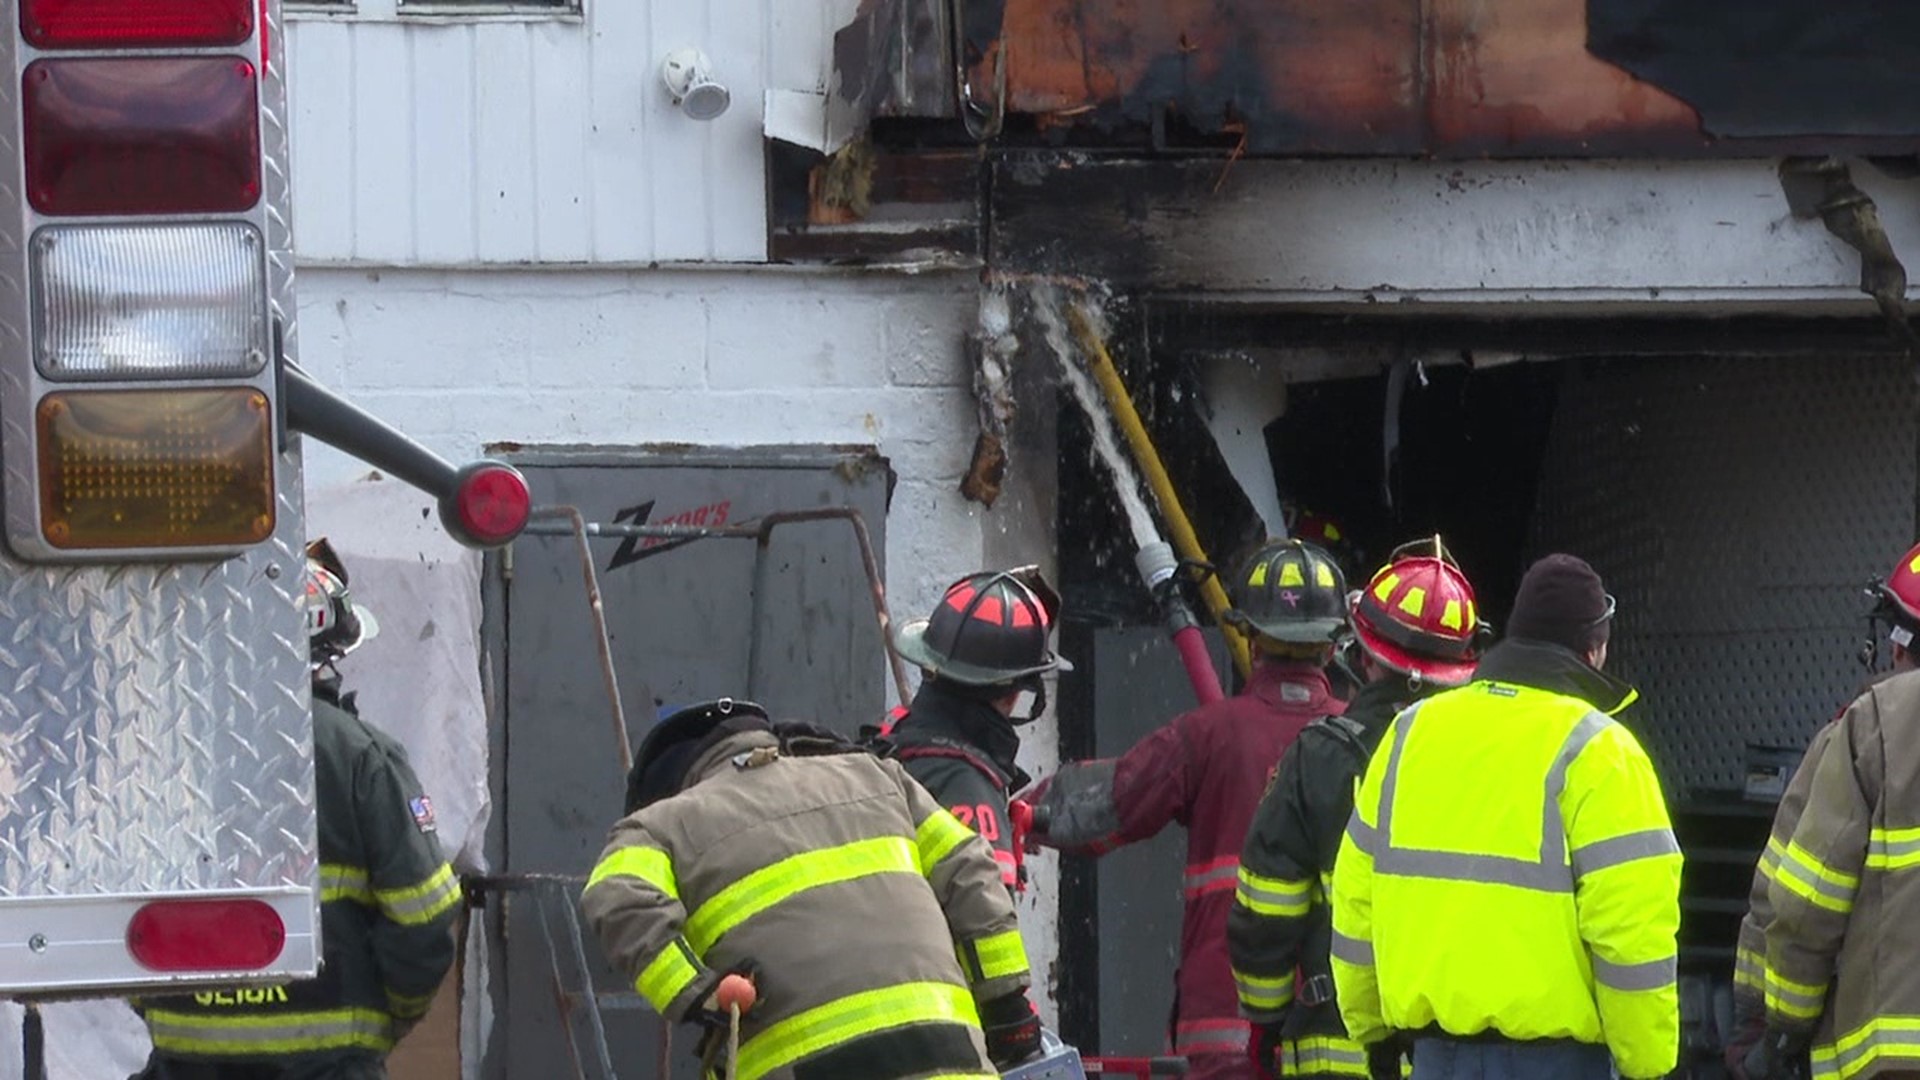 Crews responded Tuesday morning to Mid Valley Auto Body and Repair on East Lackawanna Avenue in Olyphant.